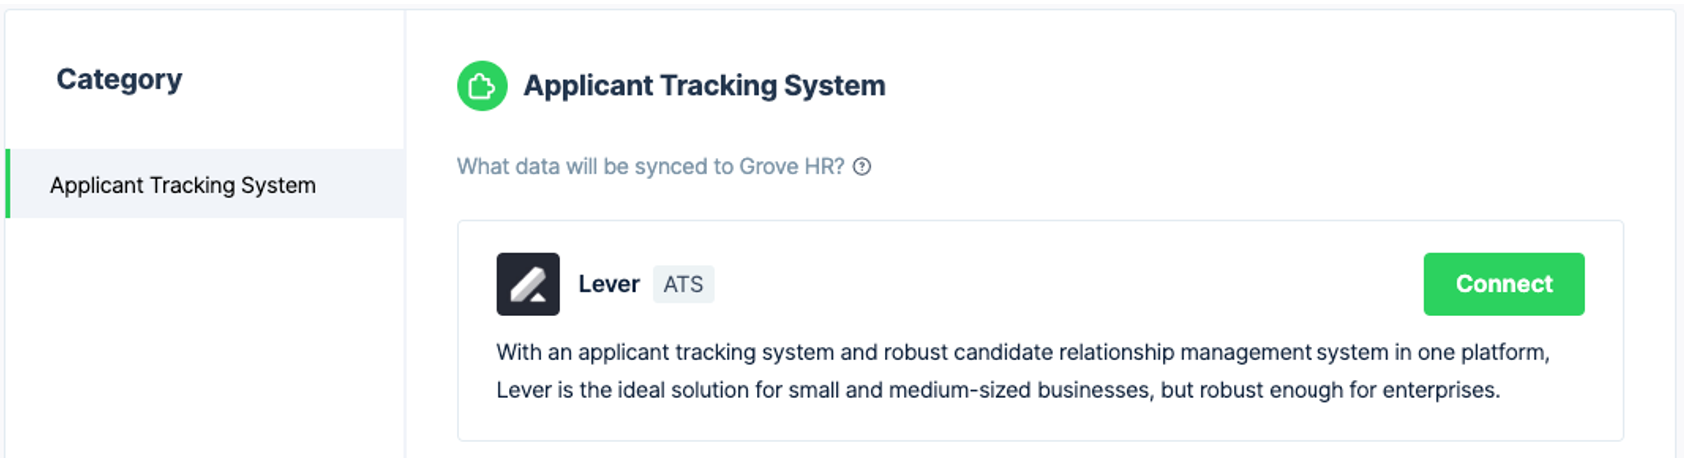 Lever listing on Applicant Tracking System page in GroveHR.